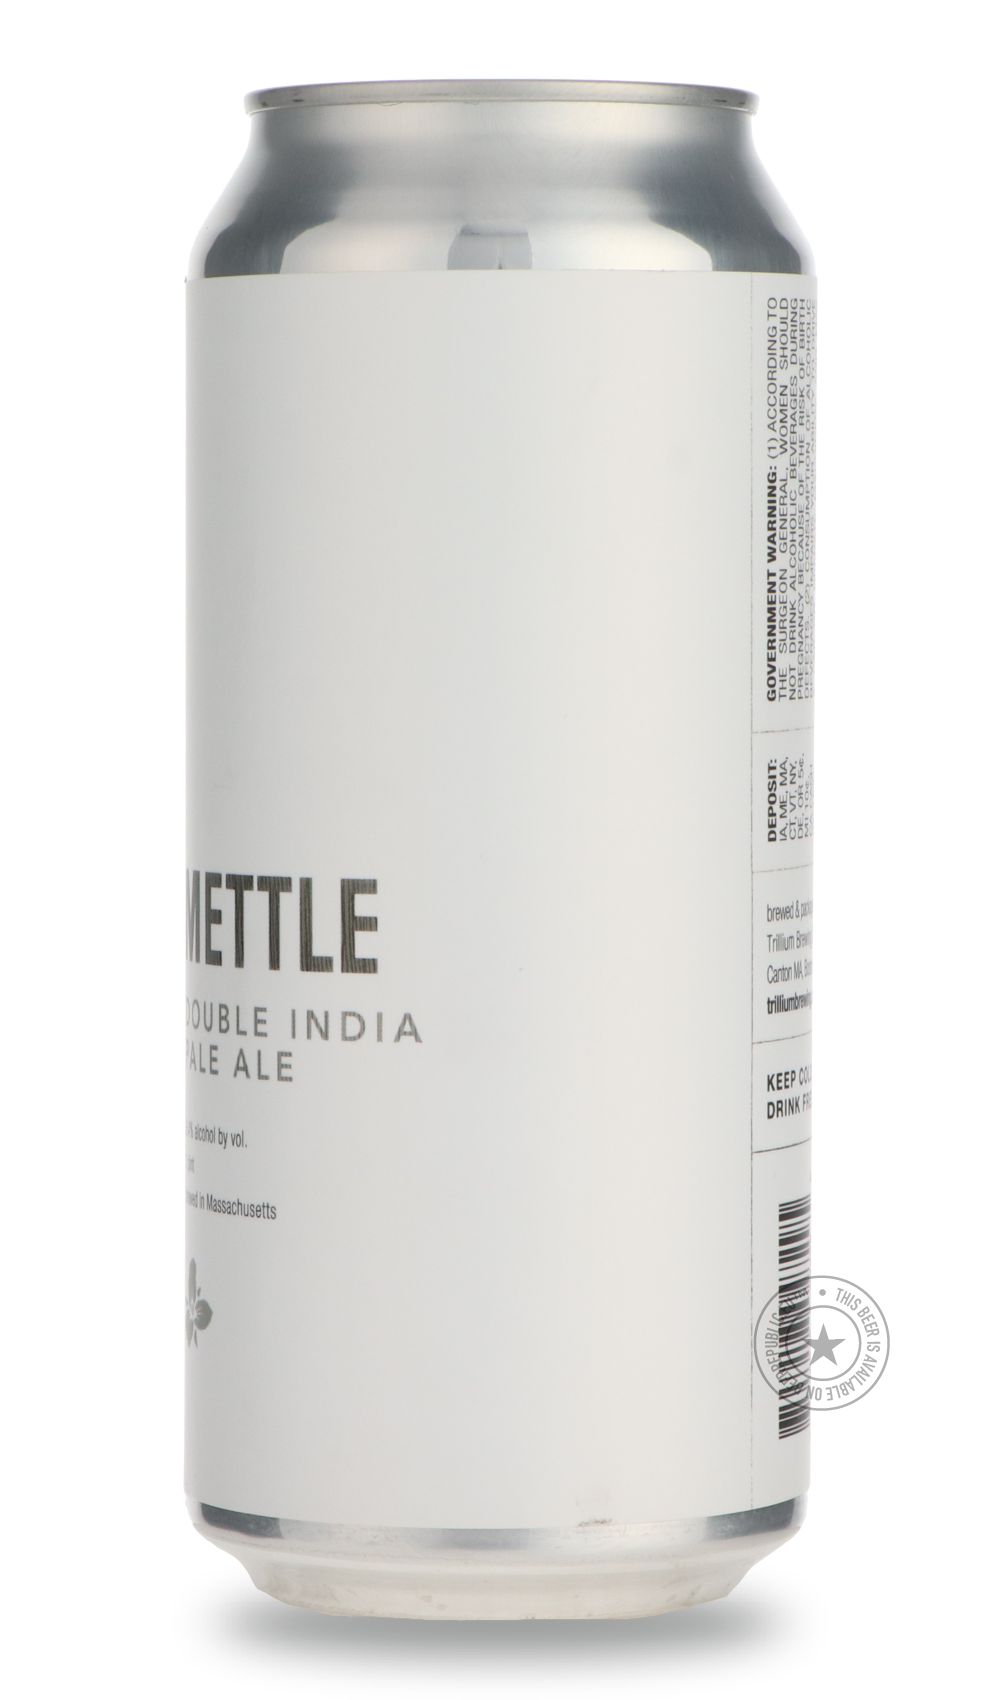 -Trillium- Mettle-IPA- Only @ Beer Republic - The best online beer store for American & Canadian craft beer - Buy beer online from the USA and Canada - Bier online kopen - Amerikaans bier kopen - Craft beer store - Craft beer kopen - Amerikanisch bier kaufen - Bier online kaufen - Acheter biere online - IPA - Stout - Porter - New England IPA - Hazy IPA - Imperial Stout - Barrel Aged - Barrel Aged Imperial Stout - Brown - Dark beer - Blond - Blonde - Pilsner - Lager - Wheat - Weizen - Amber - Barley Wine - Q